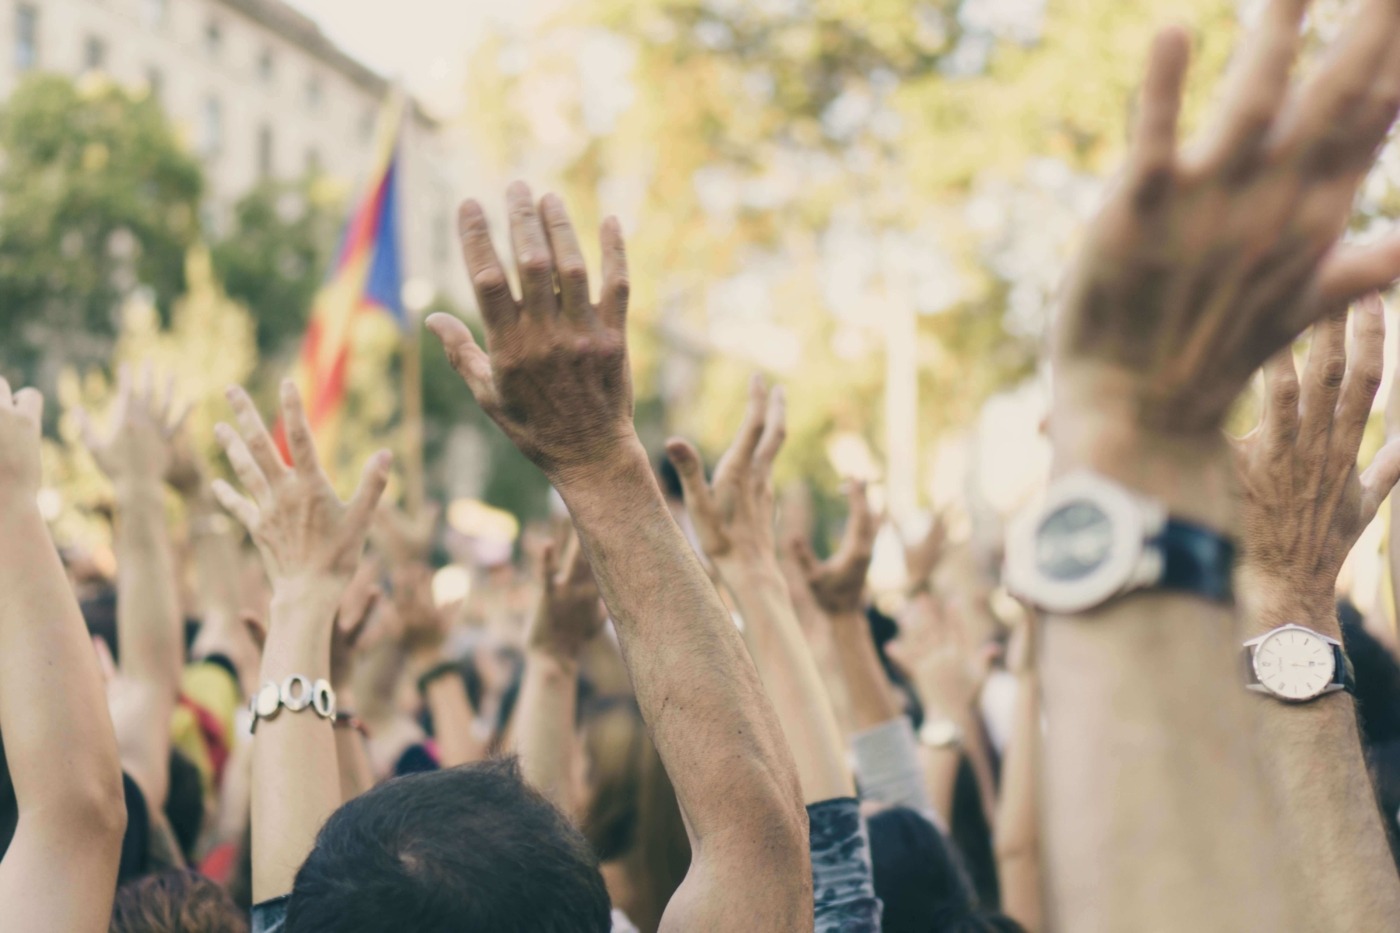 Protestors raising their arms in a crowd / Image: Unsplash